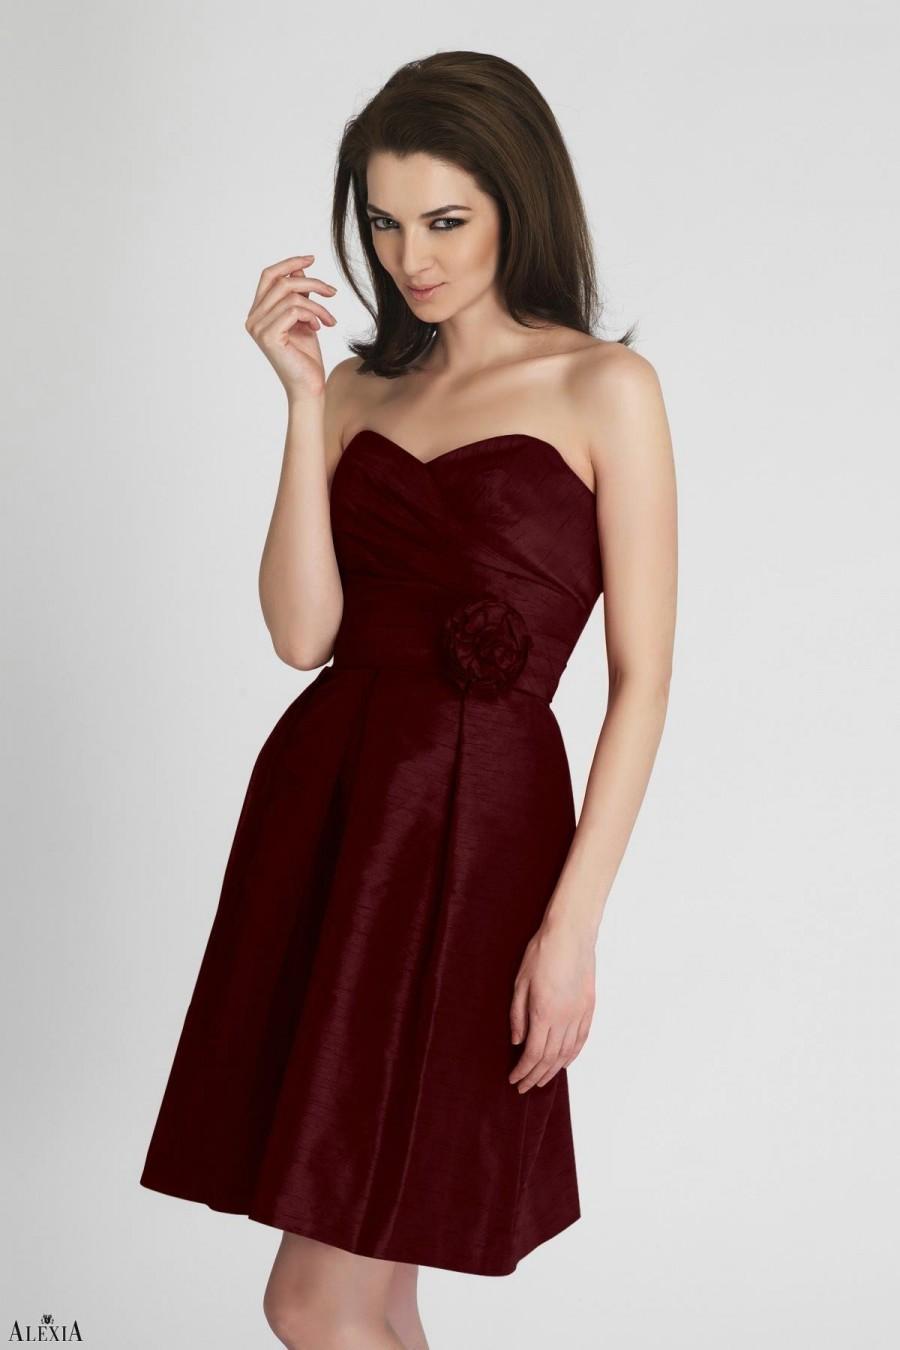 Wedding - Alexia Bridesmaid Dresses - Style 4116/116L - Formal Day Dresses